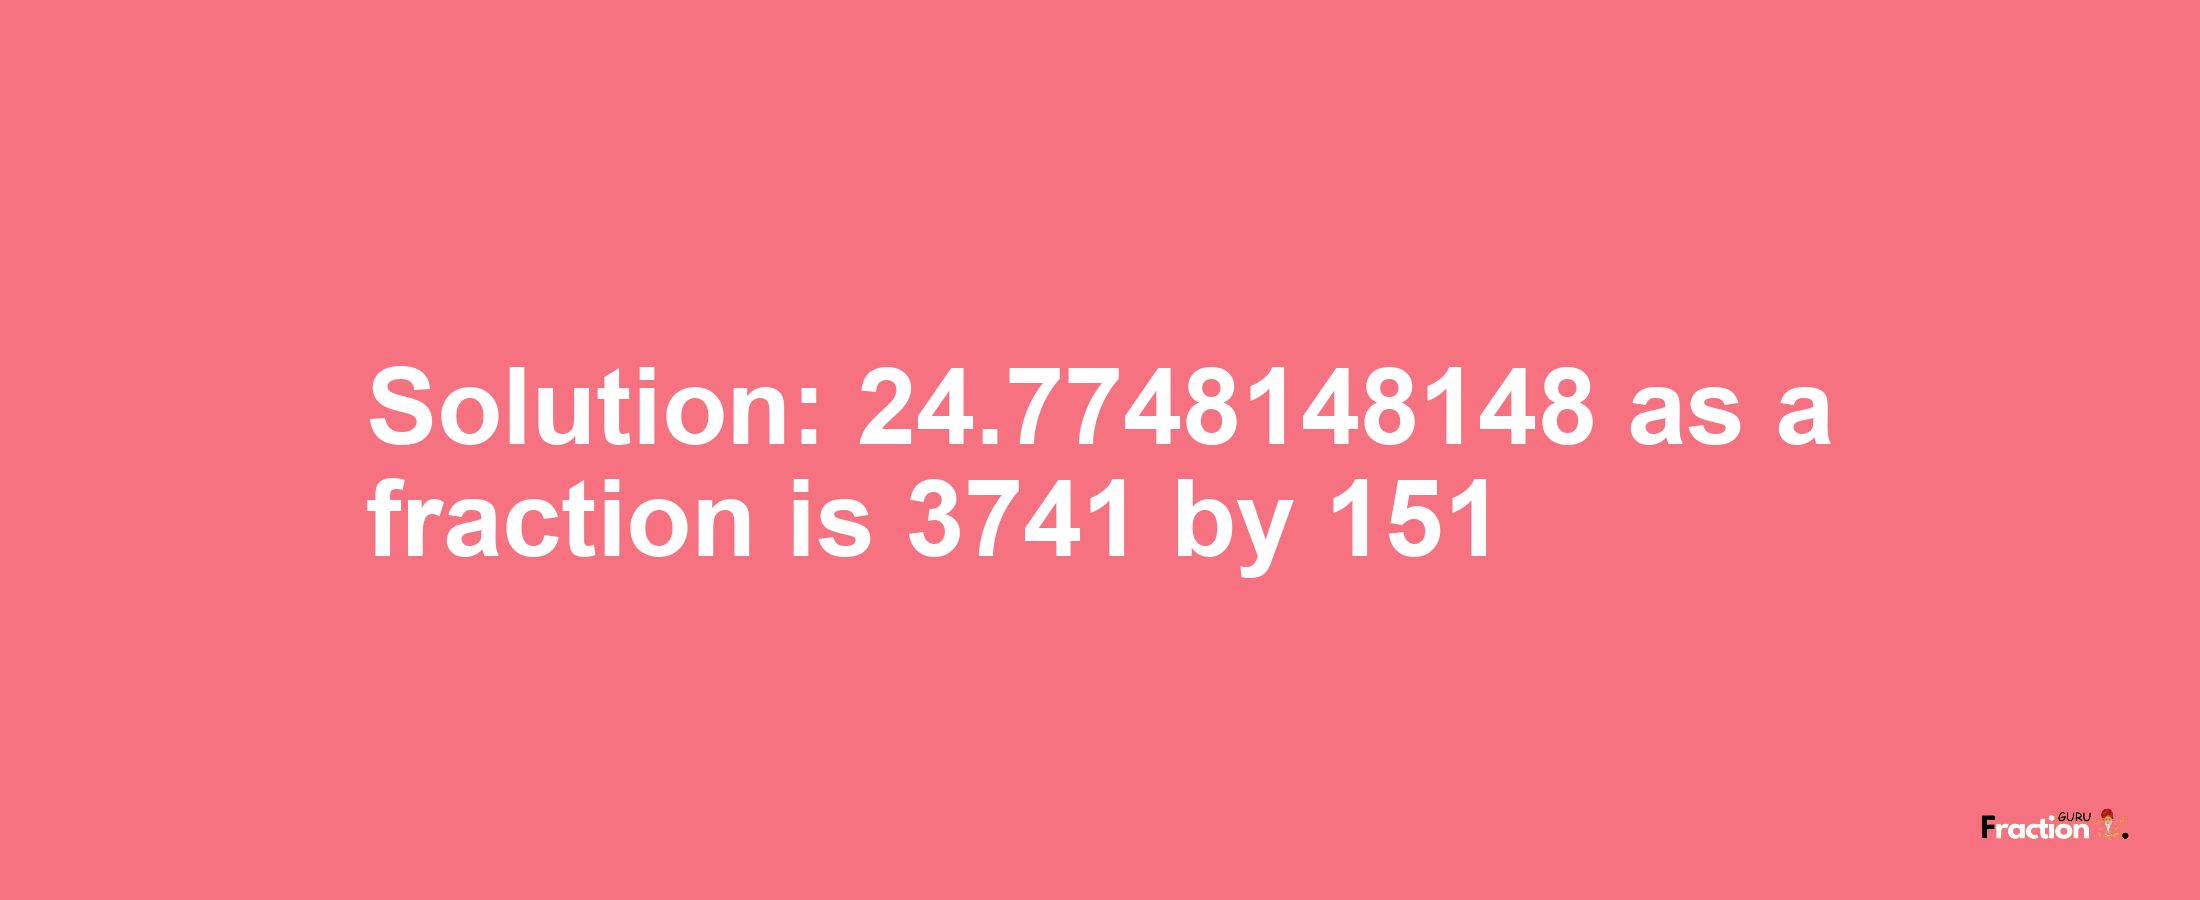 Solution:24.7748148148 as a fraction is 3741/151